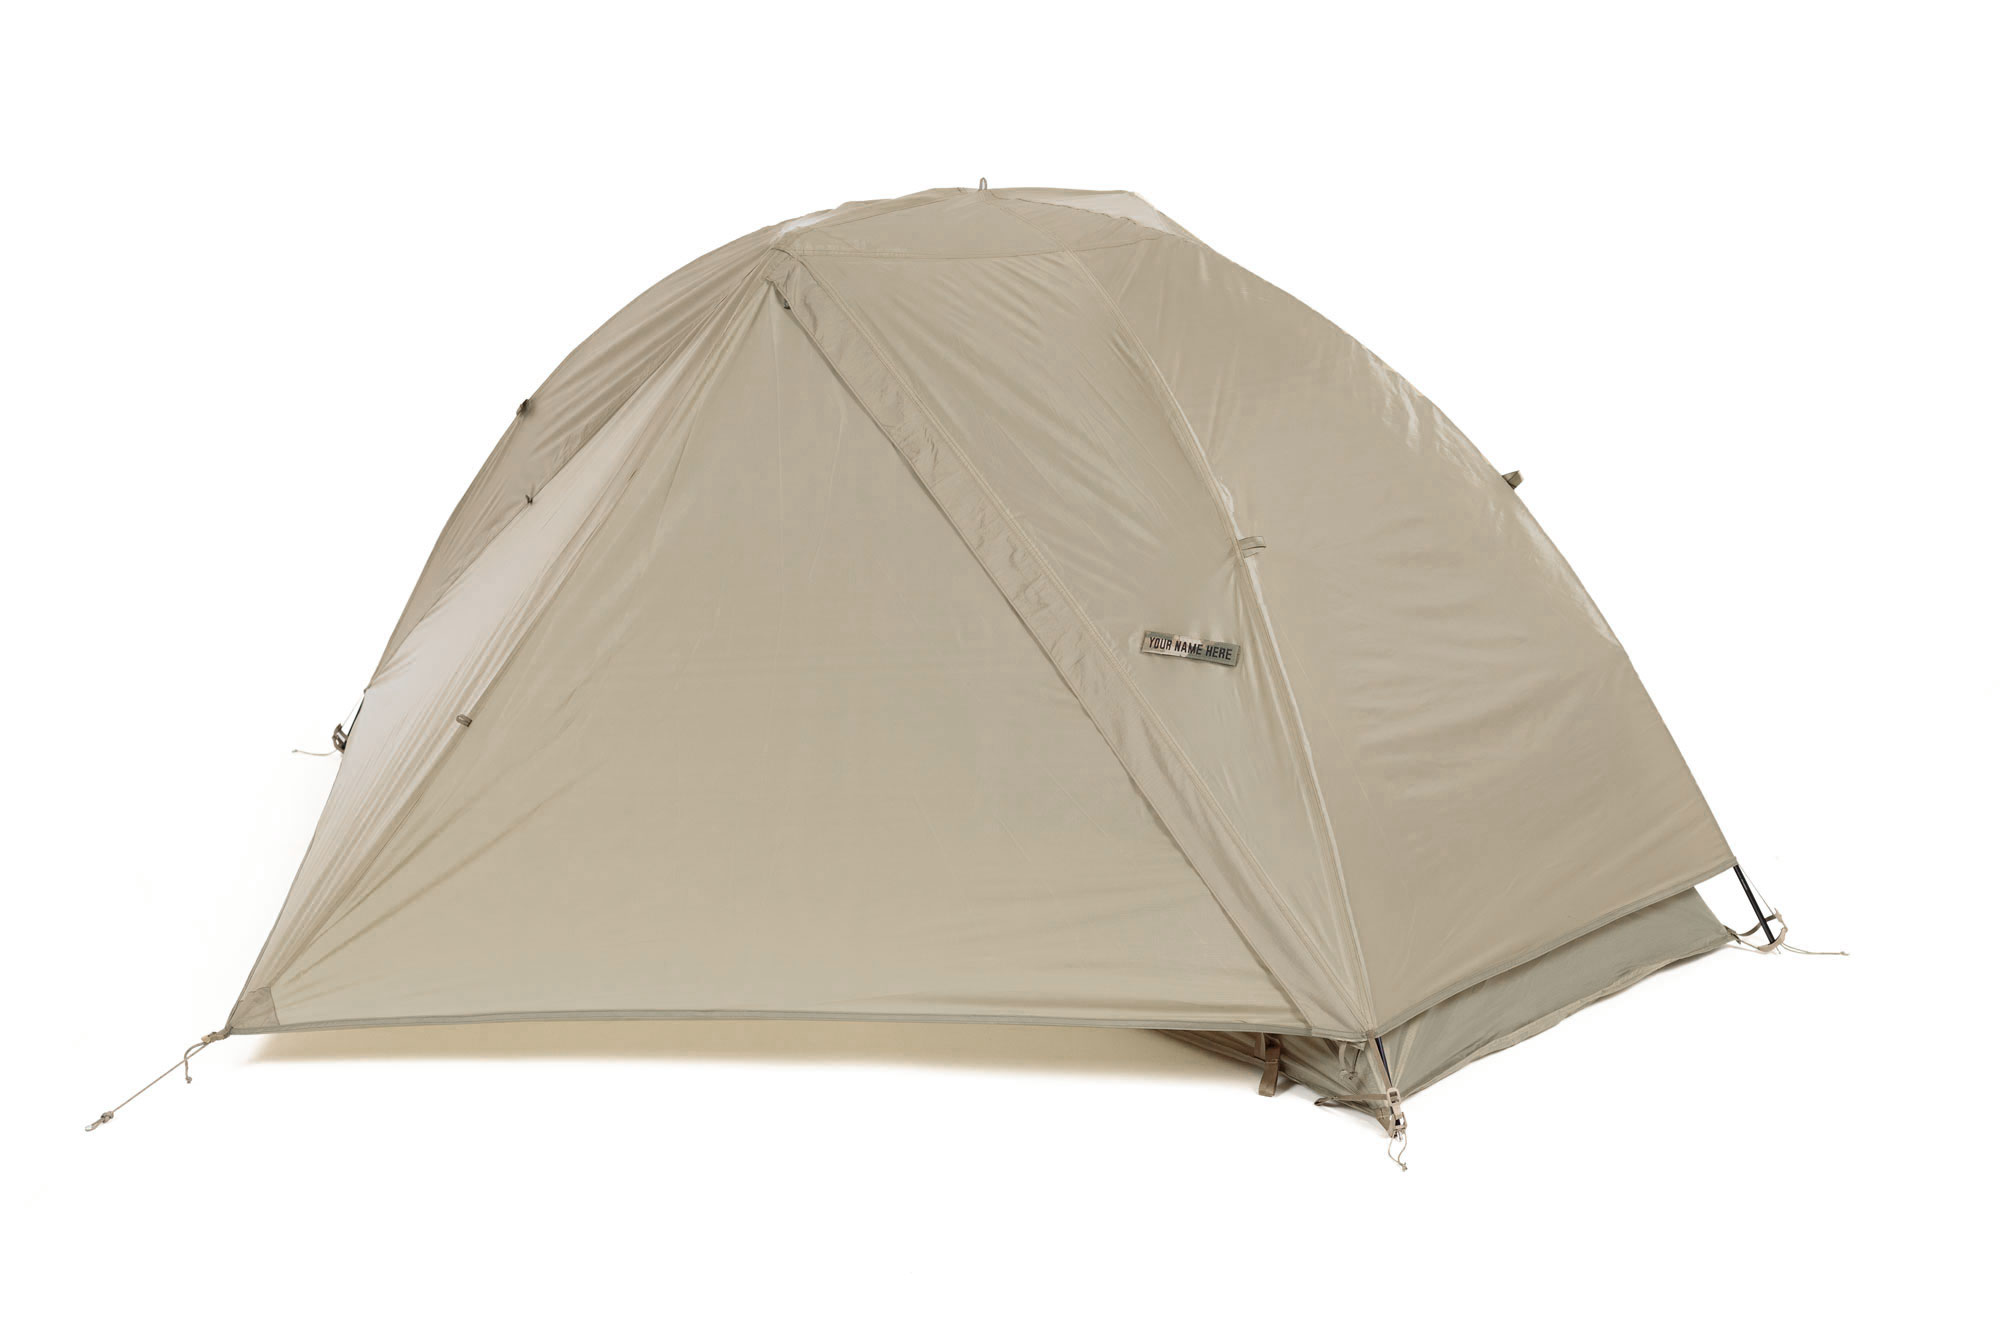 Litefighter Full Spectrum Coyote Tan Military 1-One Man Combat Shelter Tent #2 